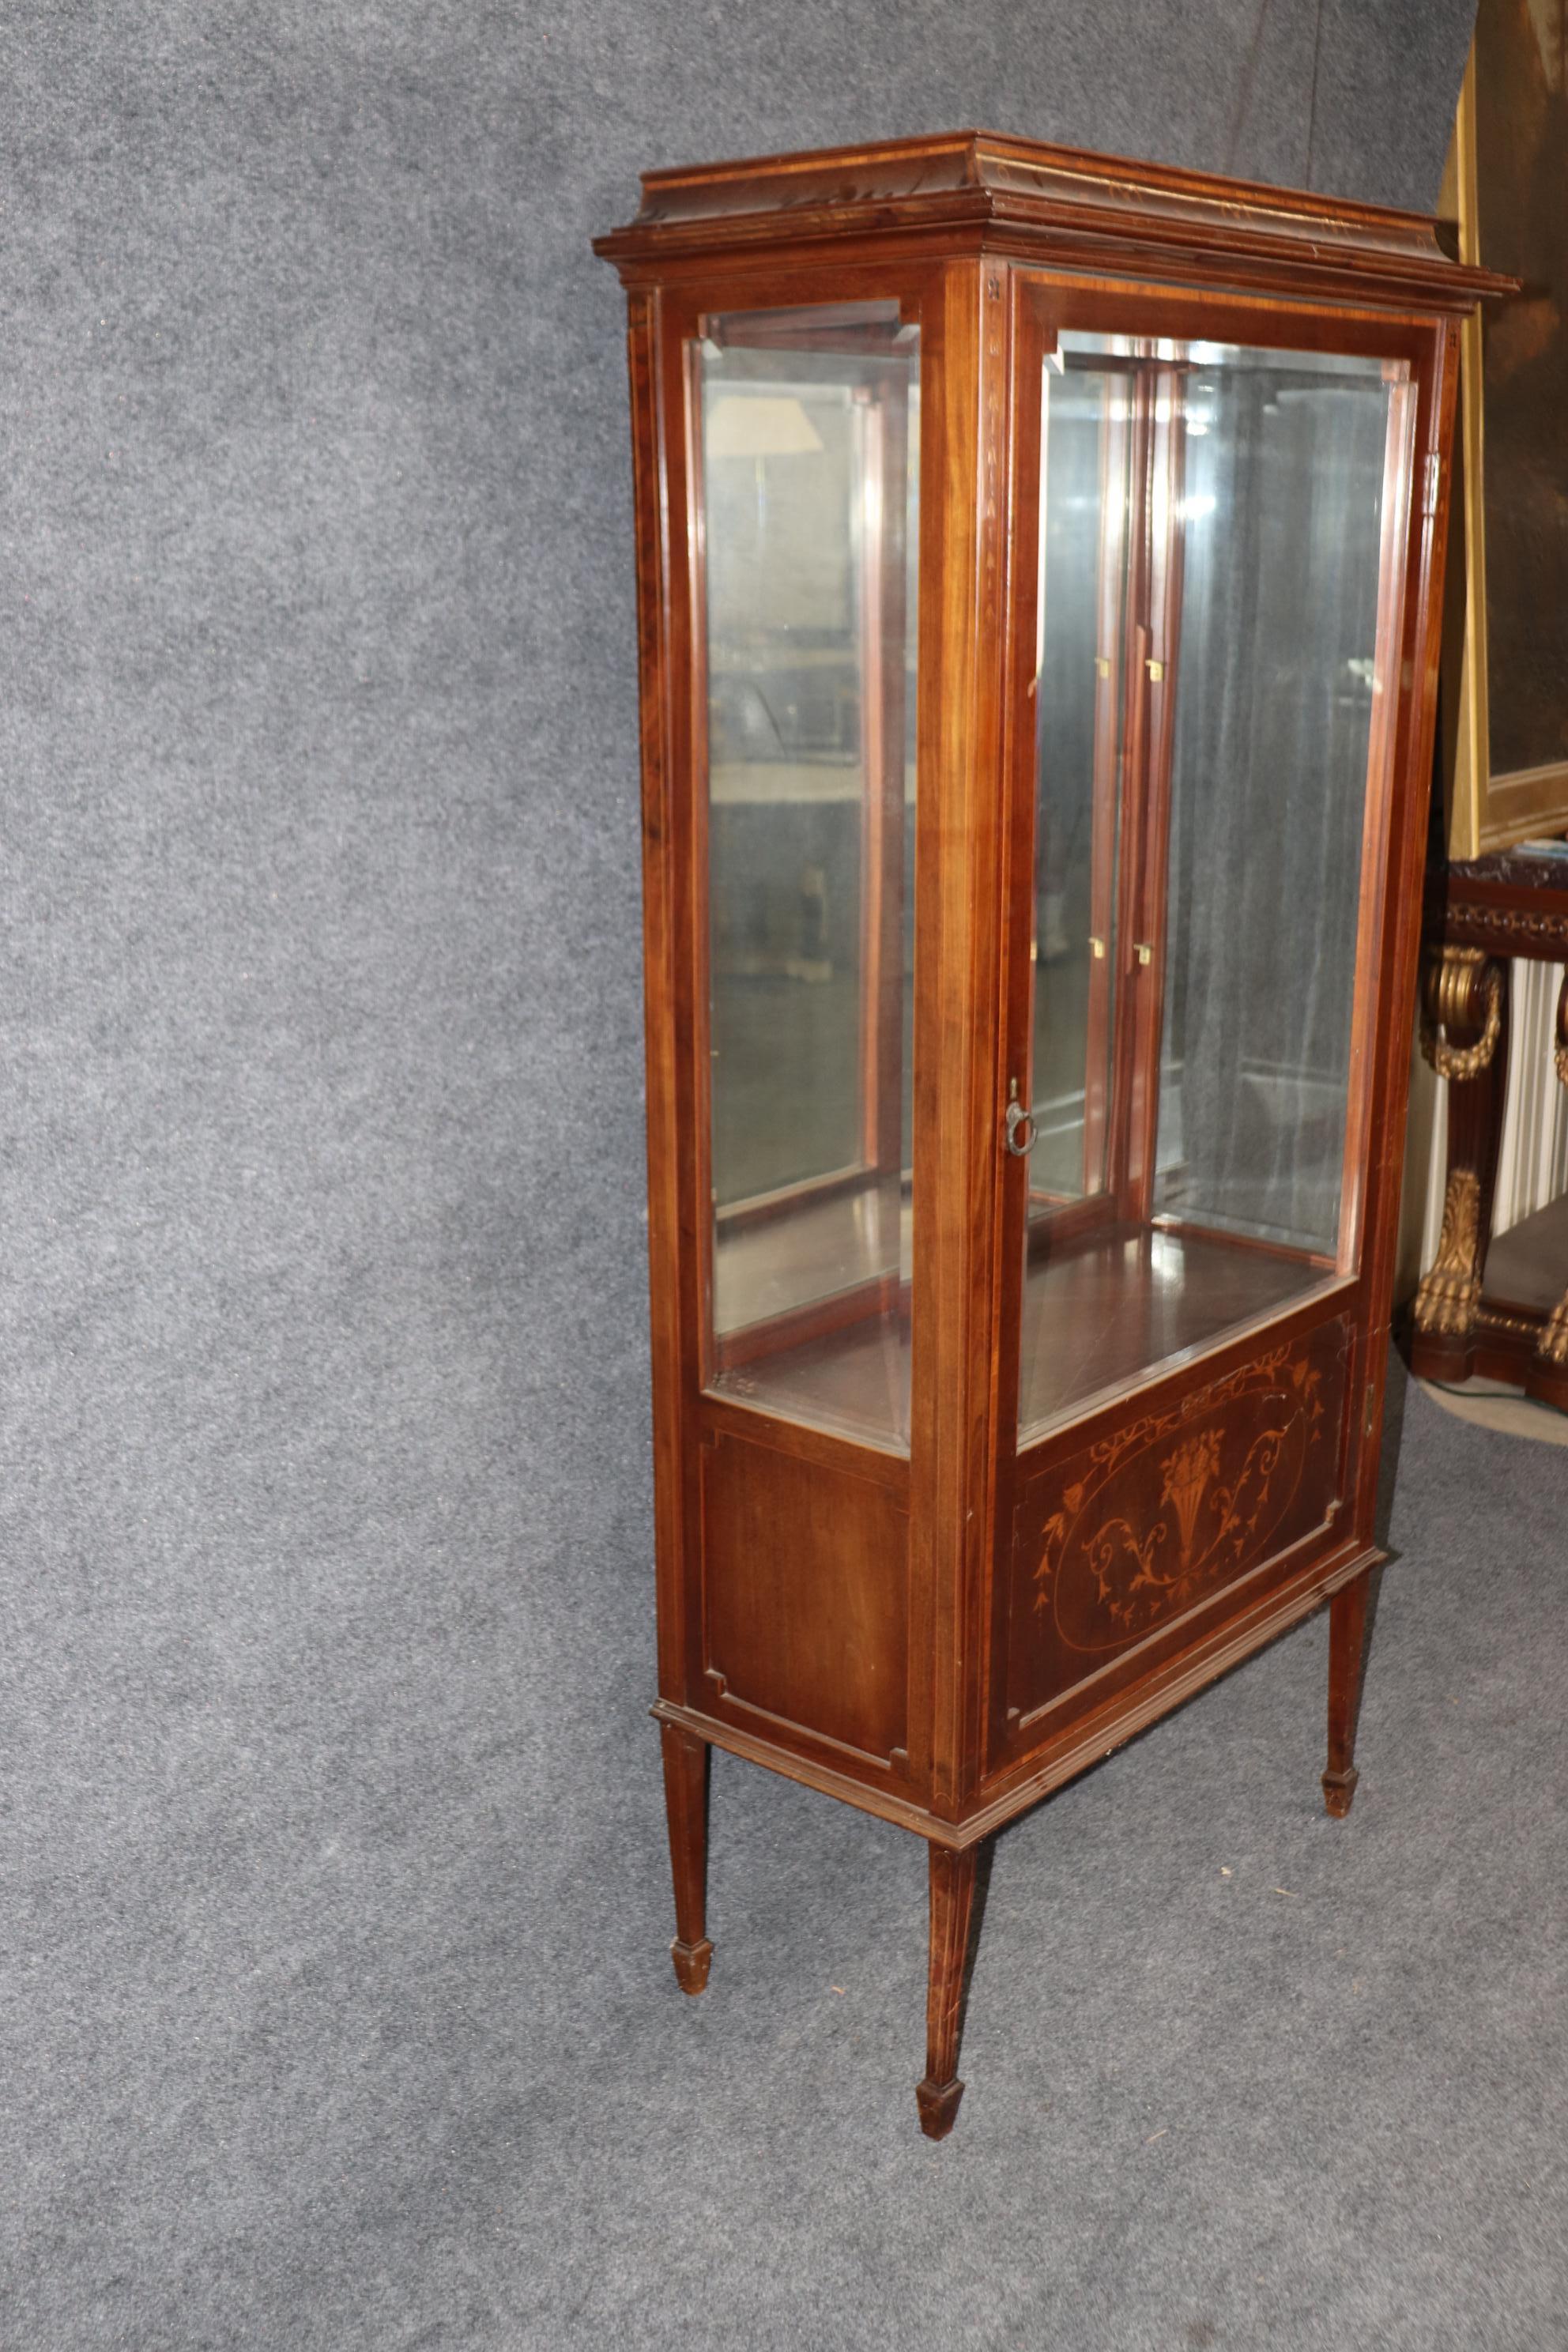 Early 20th Century English Edwardian Inlaid Walnut and Satinwood Mirrored Vitrine Curio Cabinet  For Sale